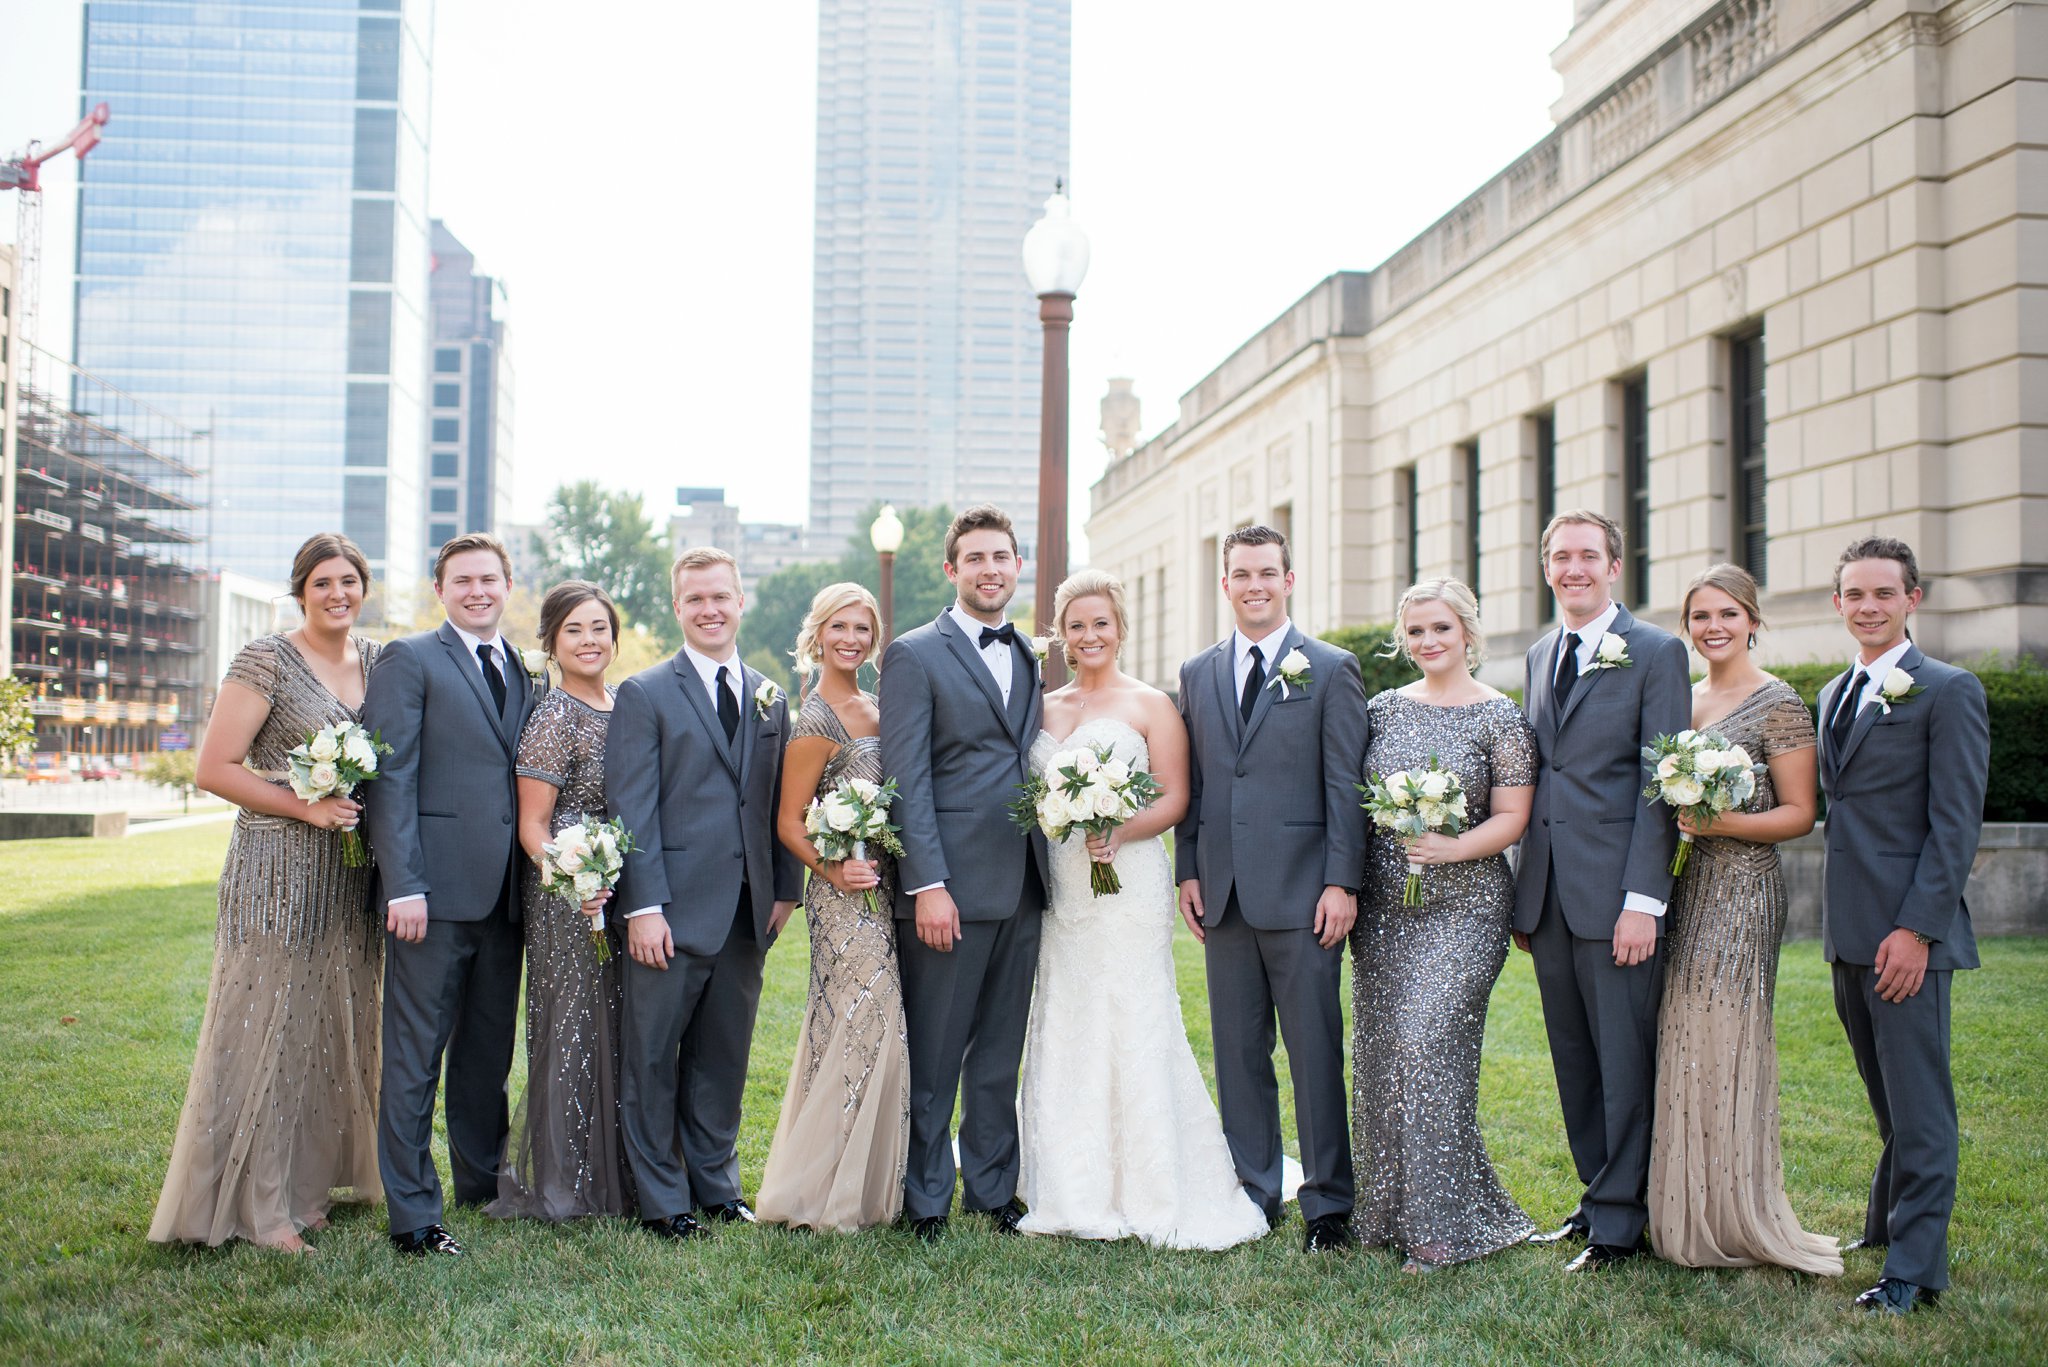 Union Station Wedding | Indianapolis, IN | War Memorial | Sparkly bridesmaids dresses